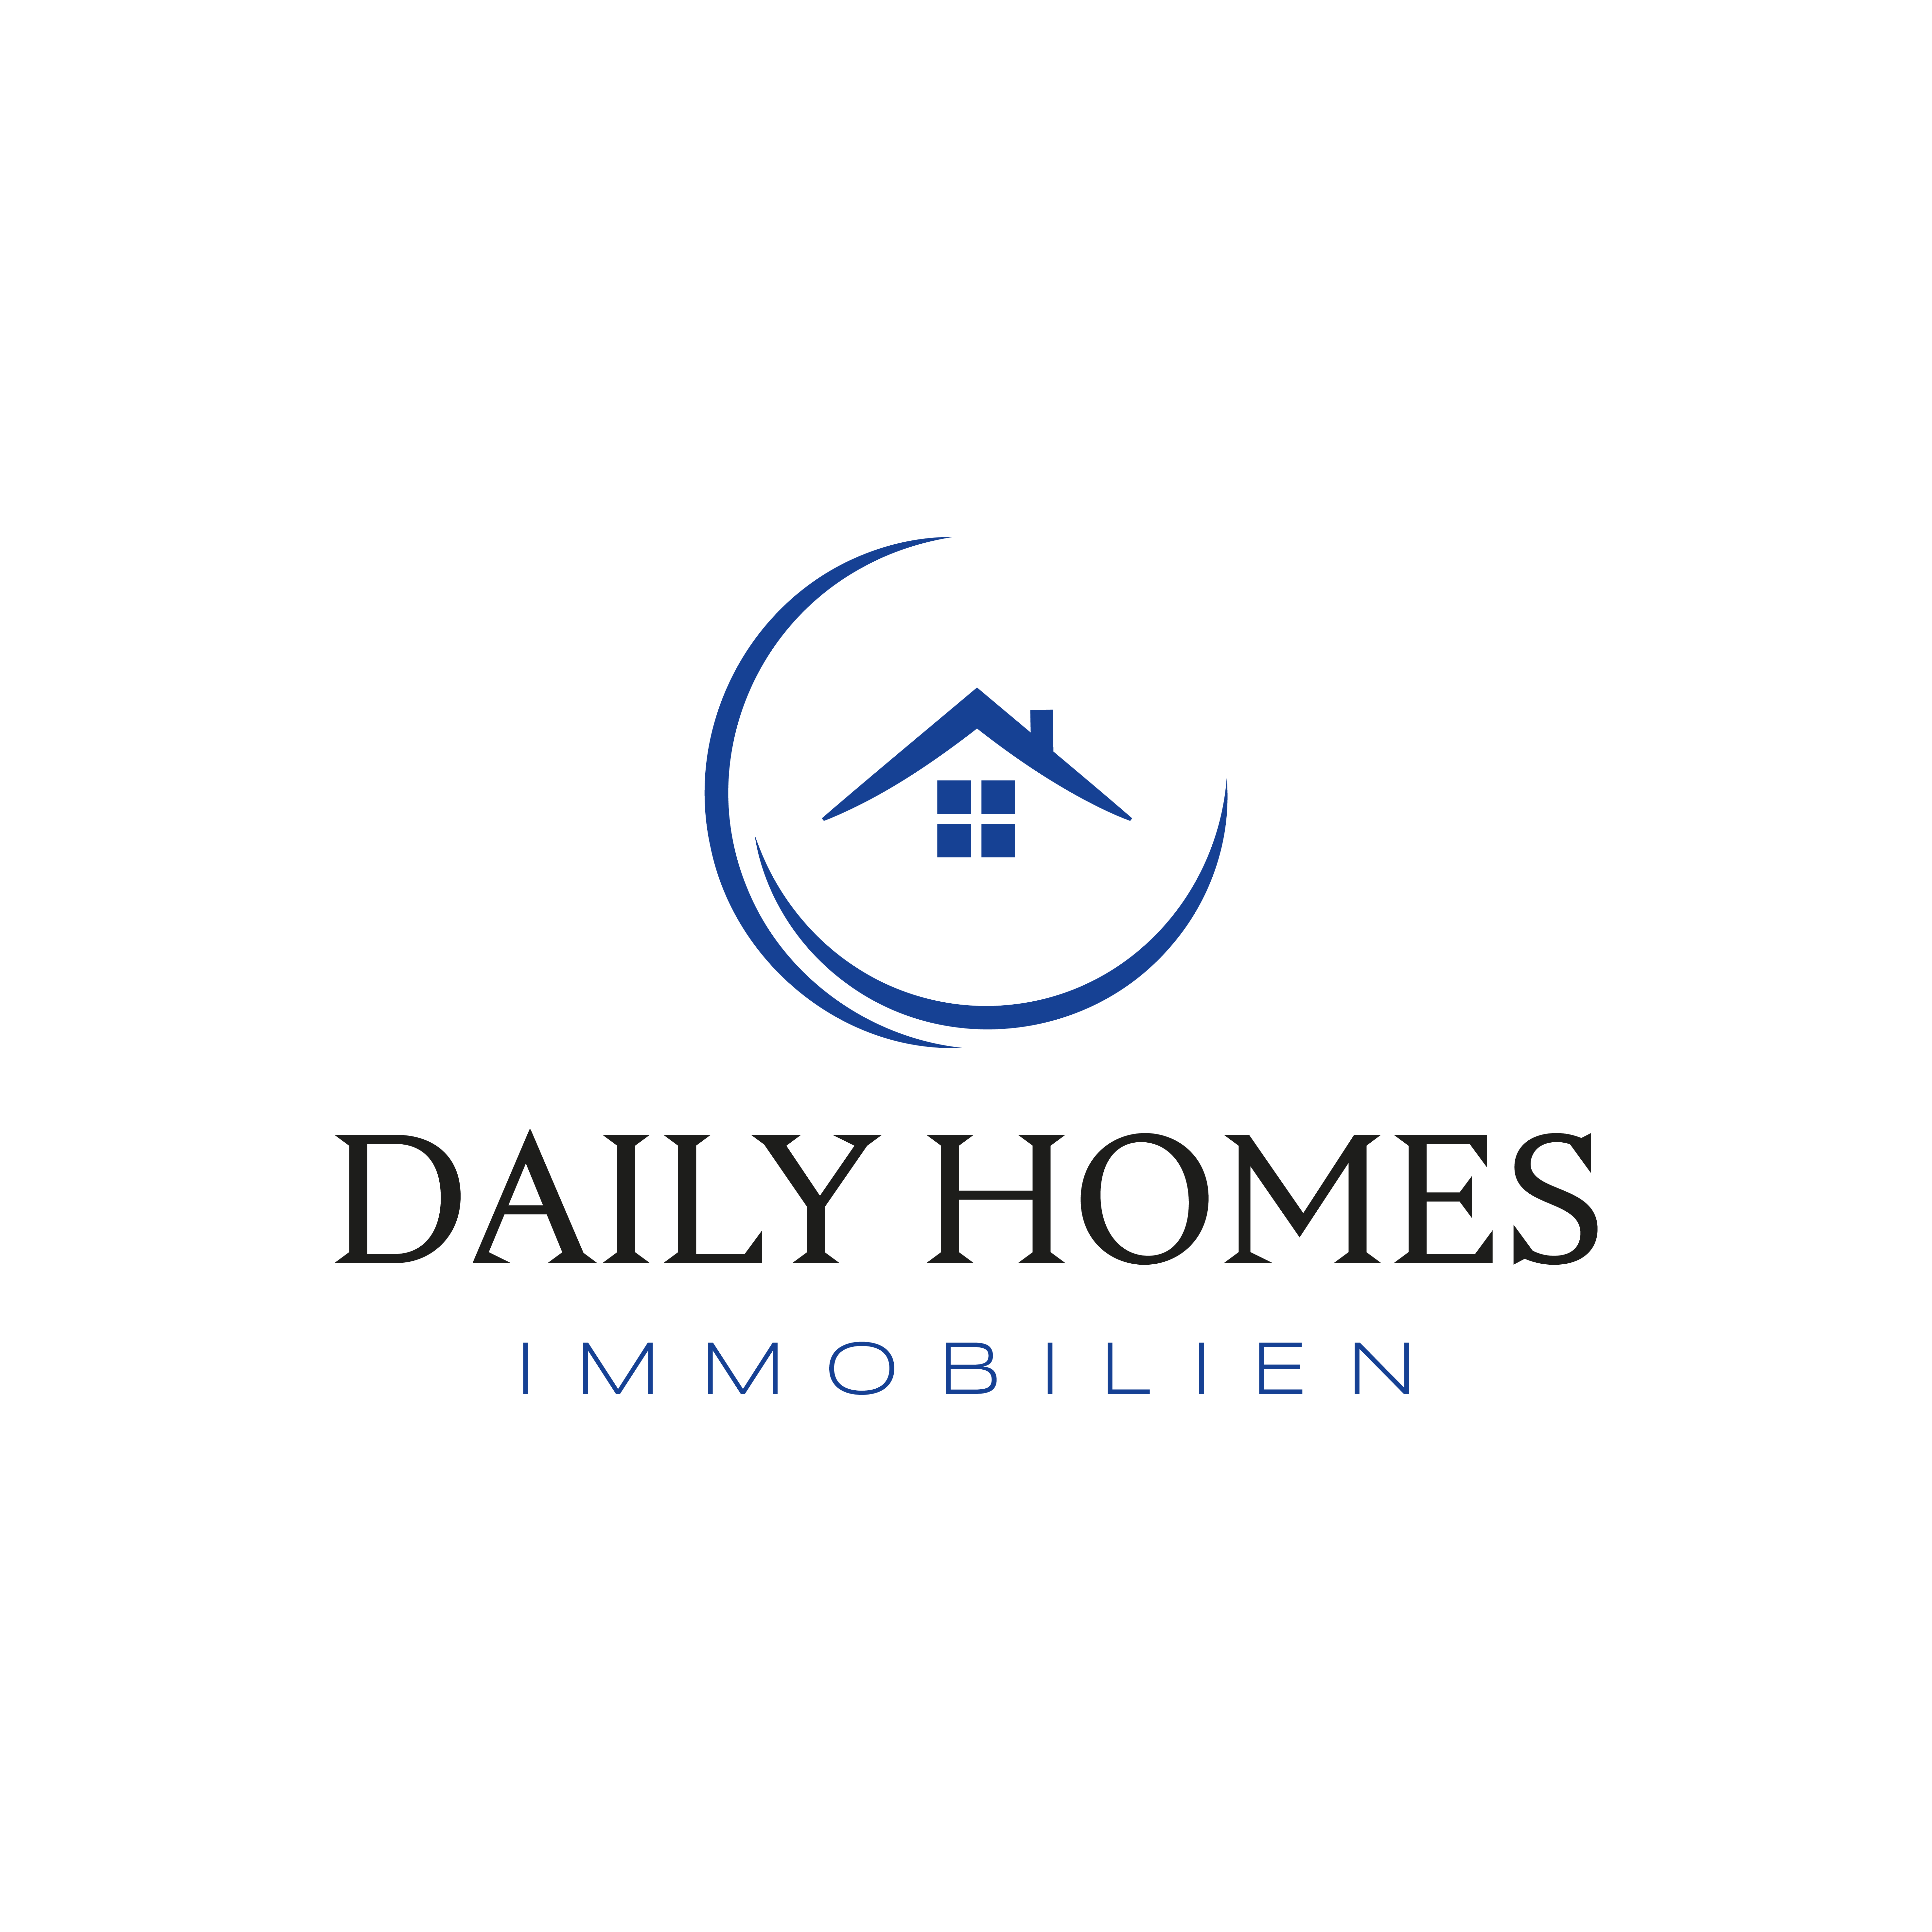 Daily Homes Immobilien Logo